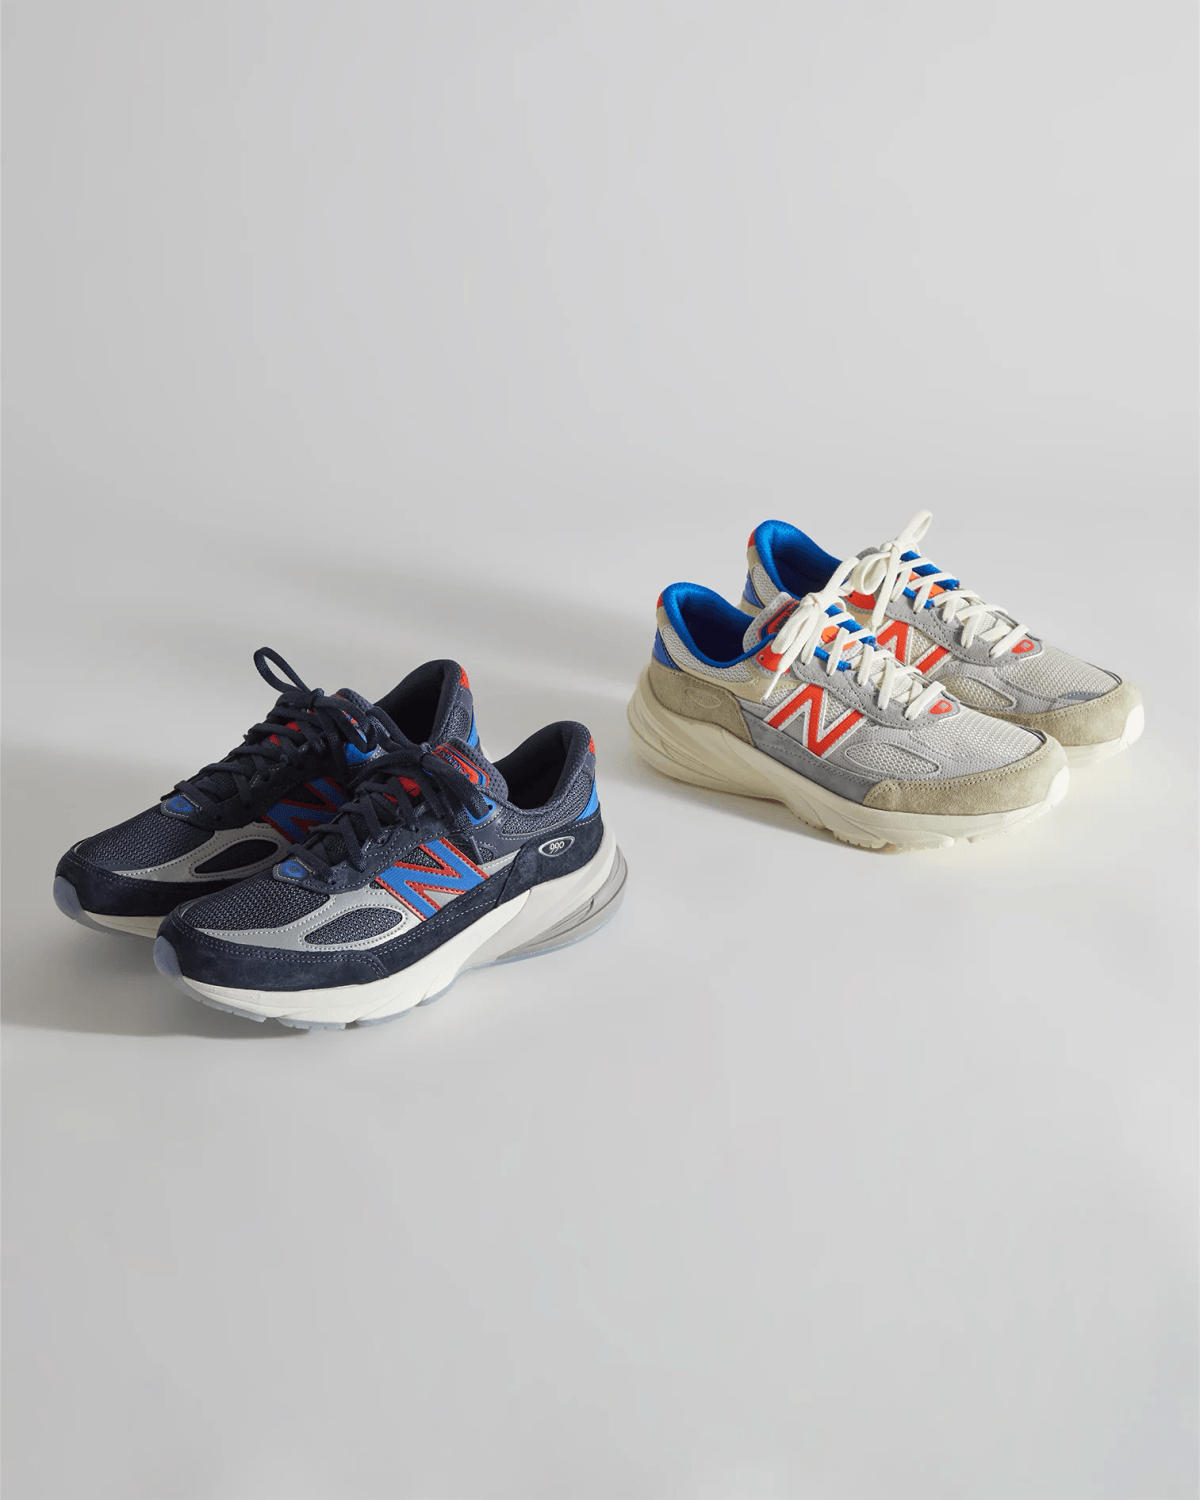 Kith x Madison Square Garden x New Balance 990v6 Pays Tribute To The Legendary Arena